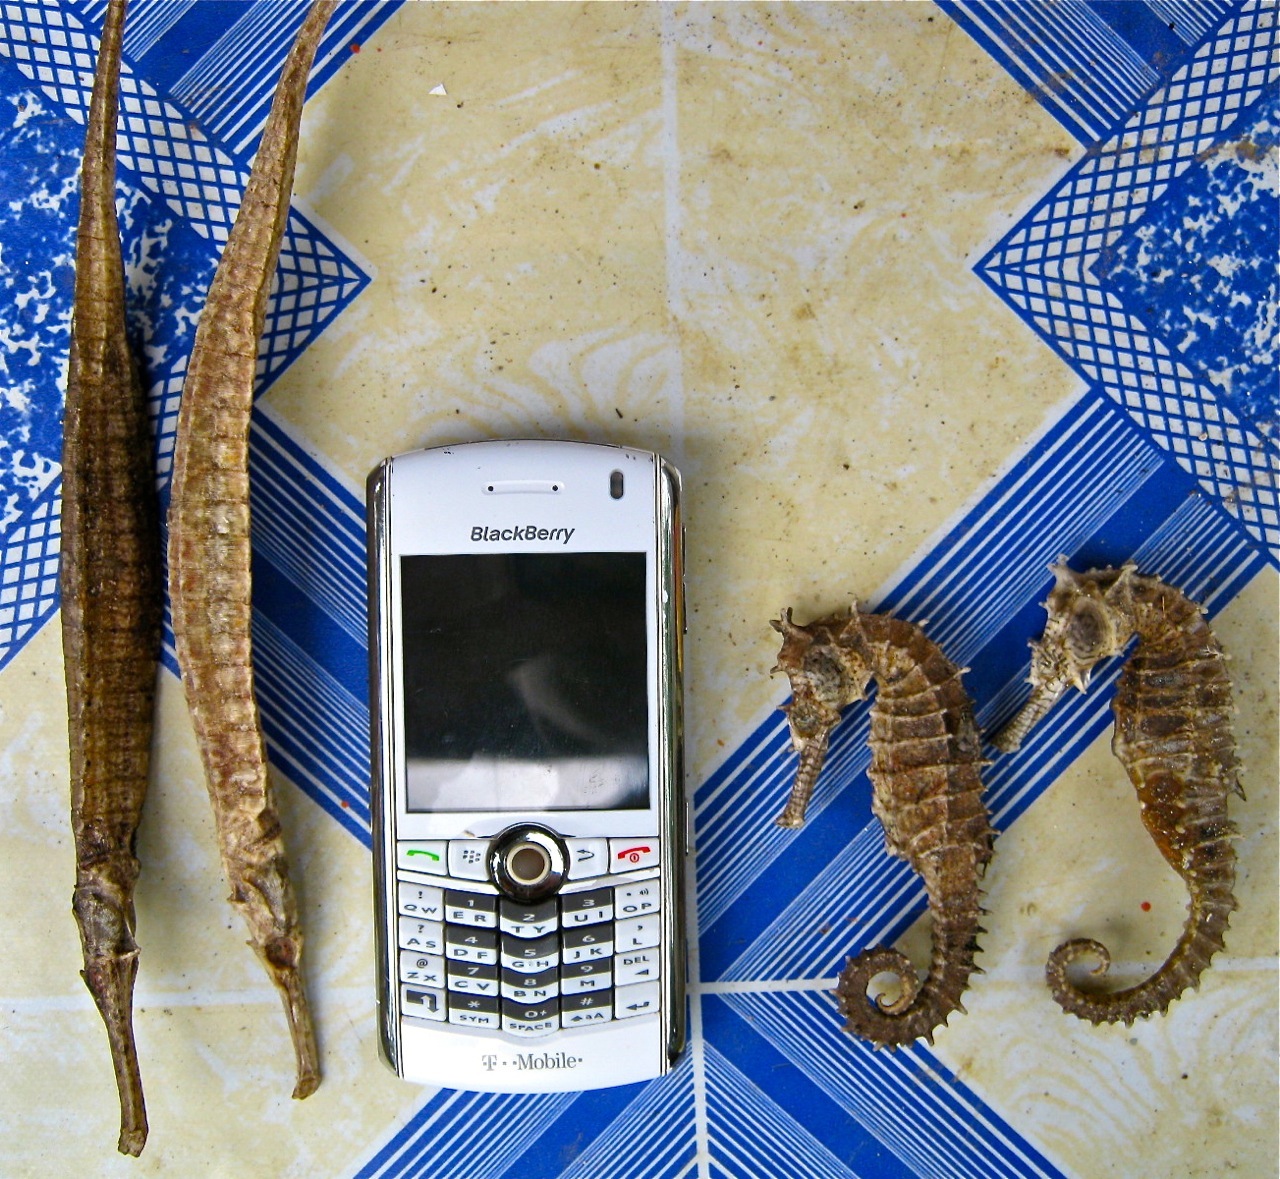 "Seadragons and seahorses with my old phone for comparison" "Retired No Way"